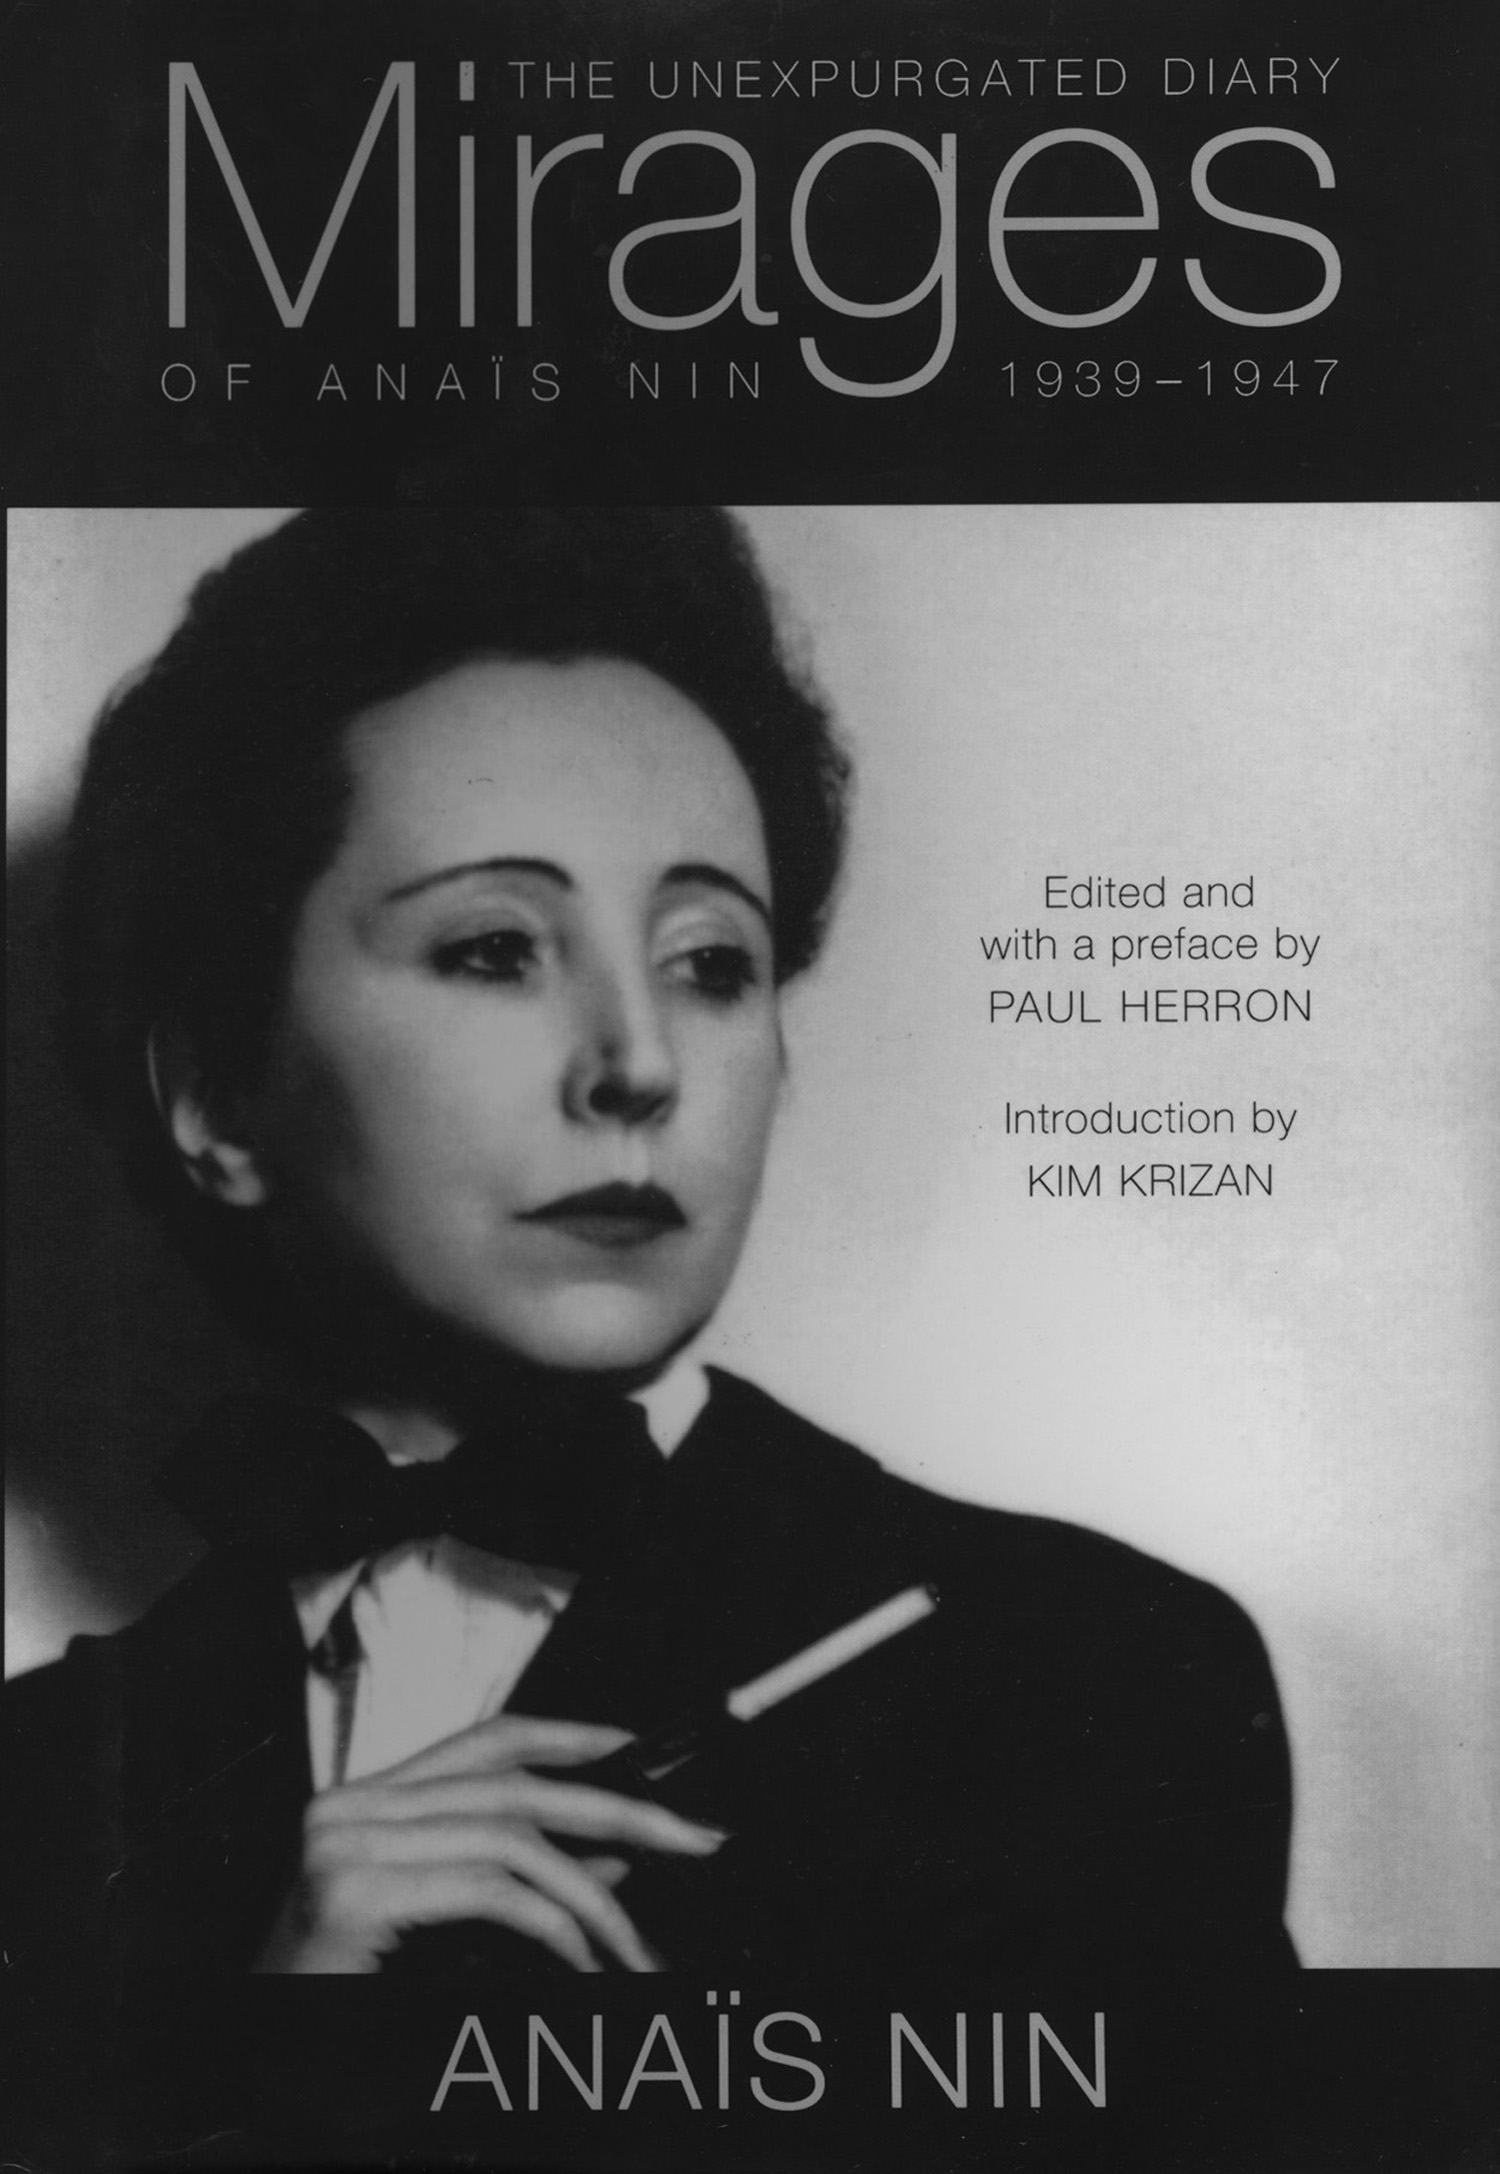 Mirages: The Unexpurgated Diary of Anais Nin 1939-1944